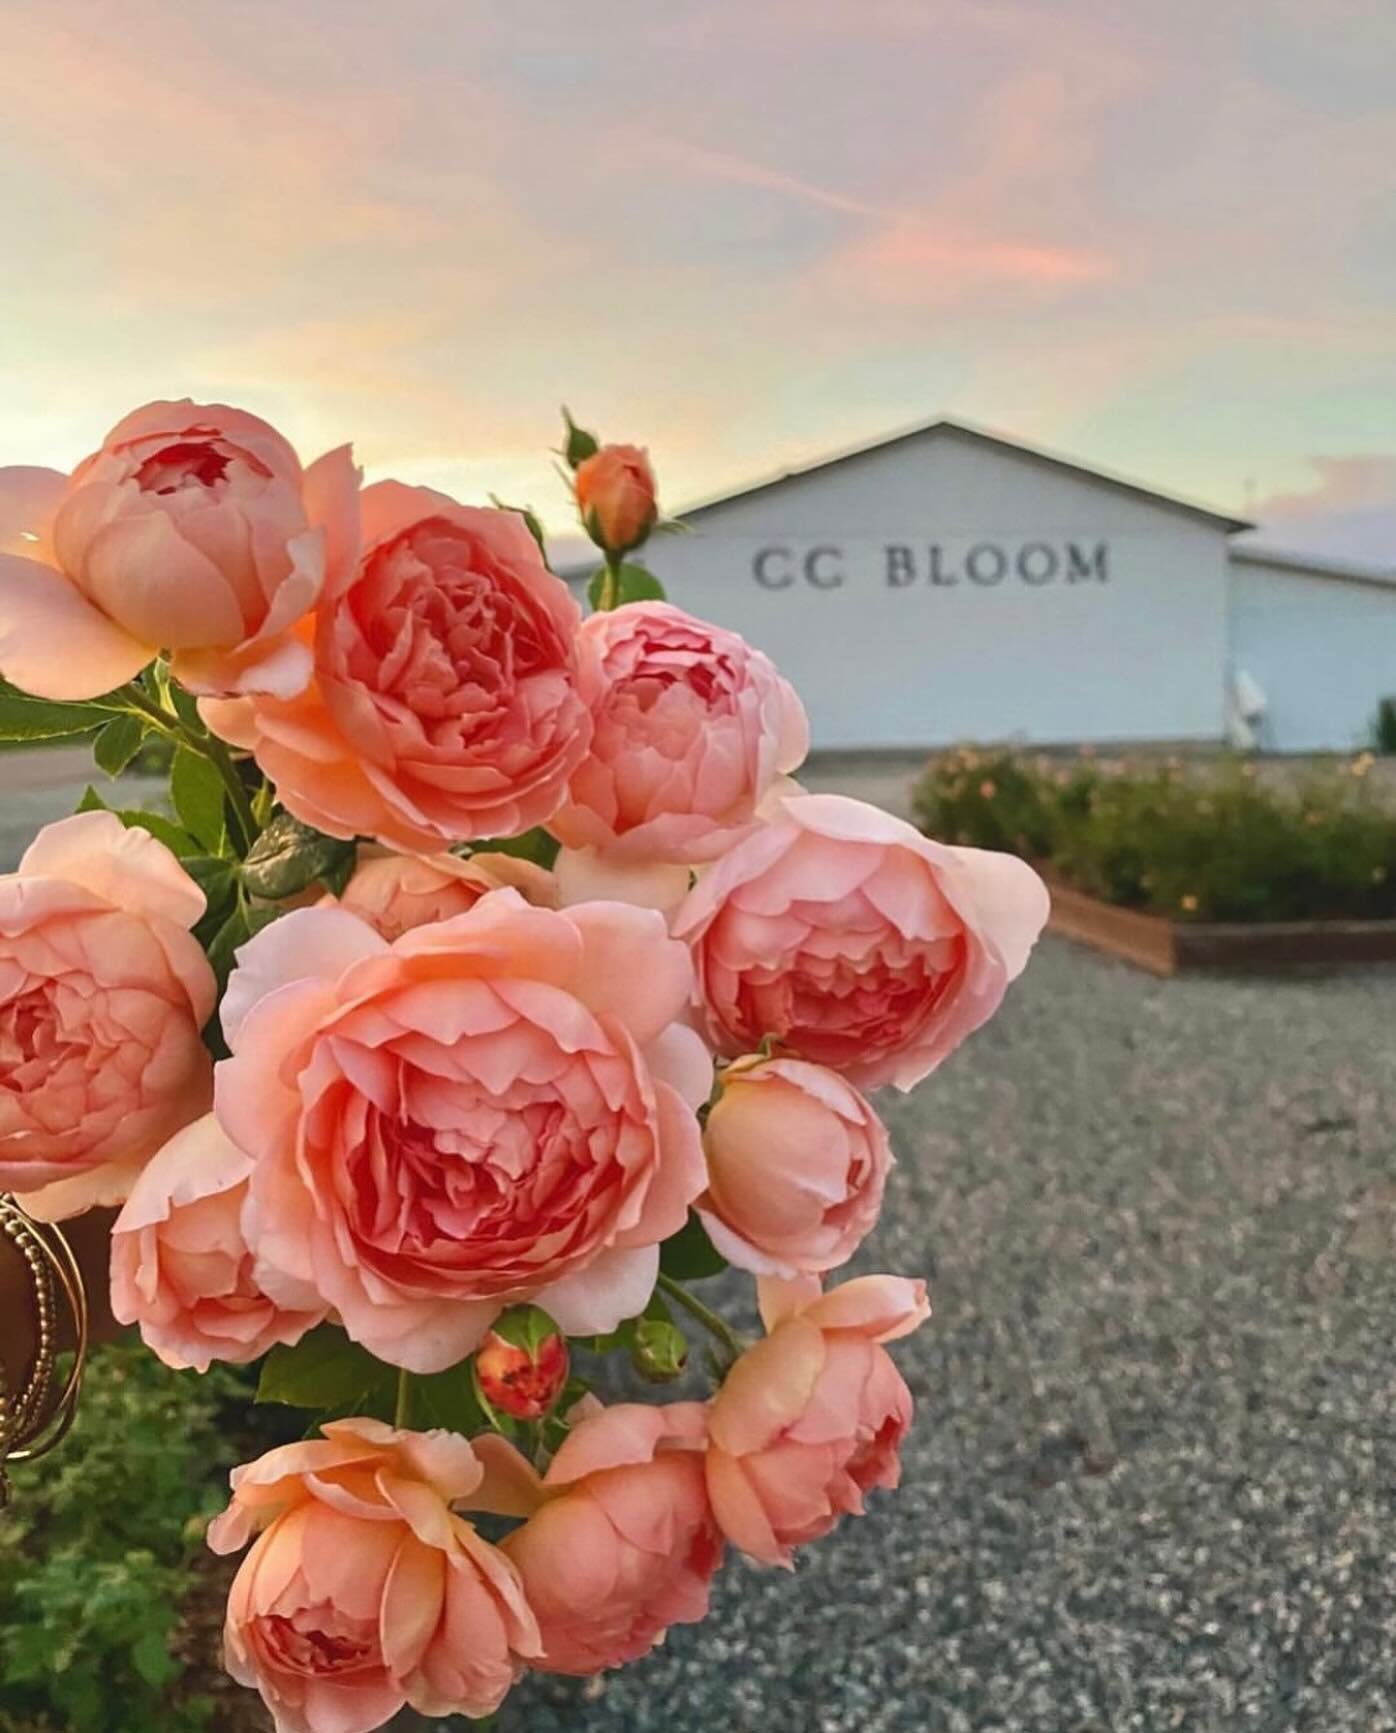 The sweet fragrance the emit can instantly lift one&rsquo;s mood&hellip;I guess I&rsquo;m obsessed you could say. Happy Saturday 😊 

#gardenroses #davidaustinroses #okanaganflowerfarm #okanaganflowers #ccbloomflowerfarm